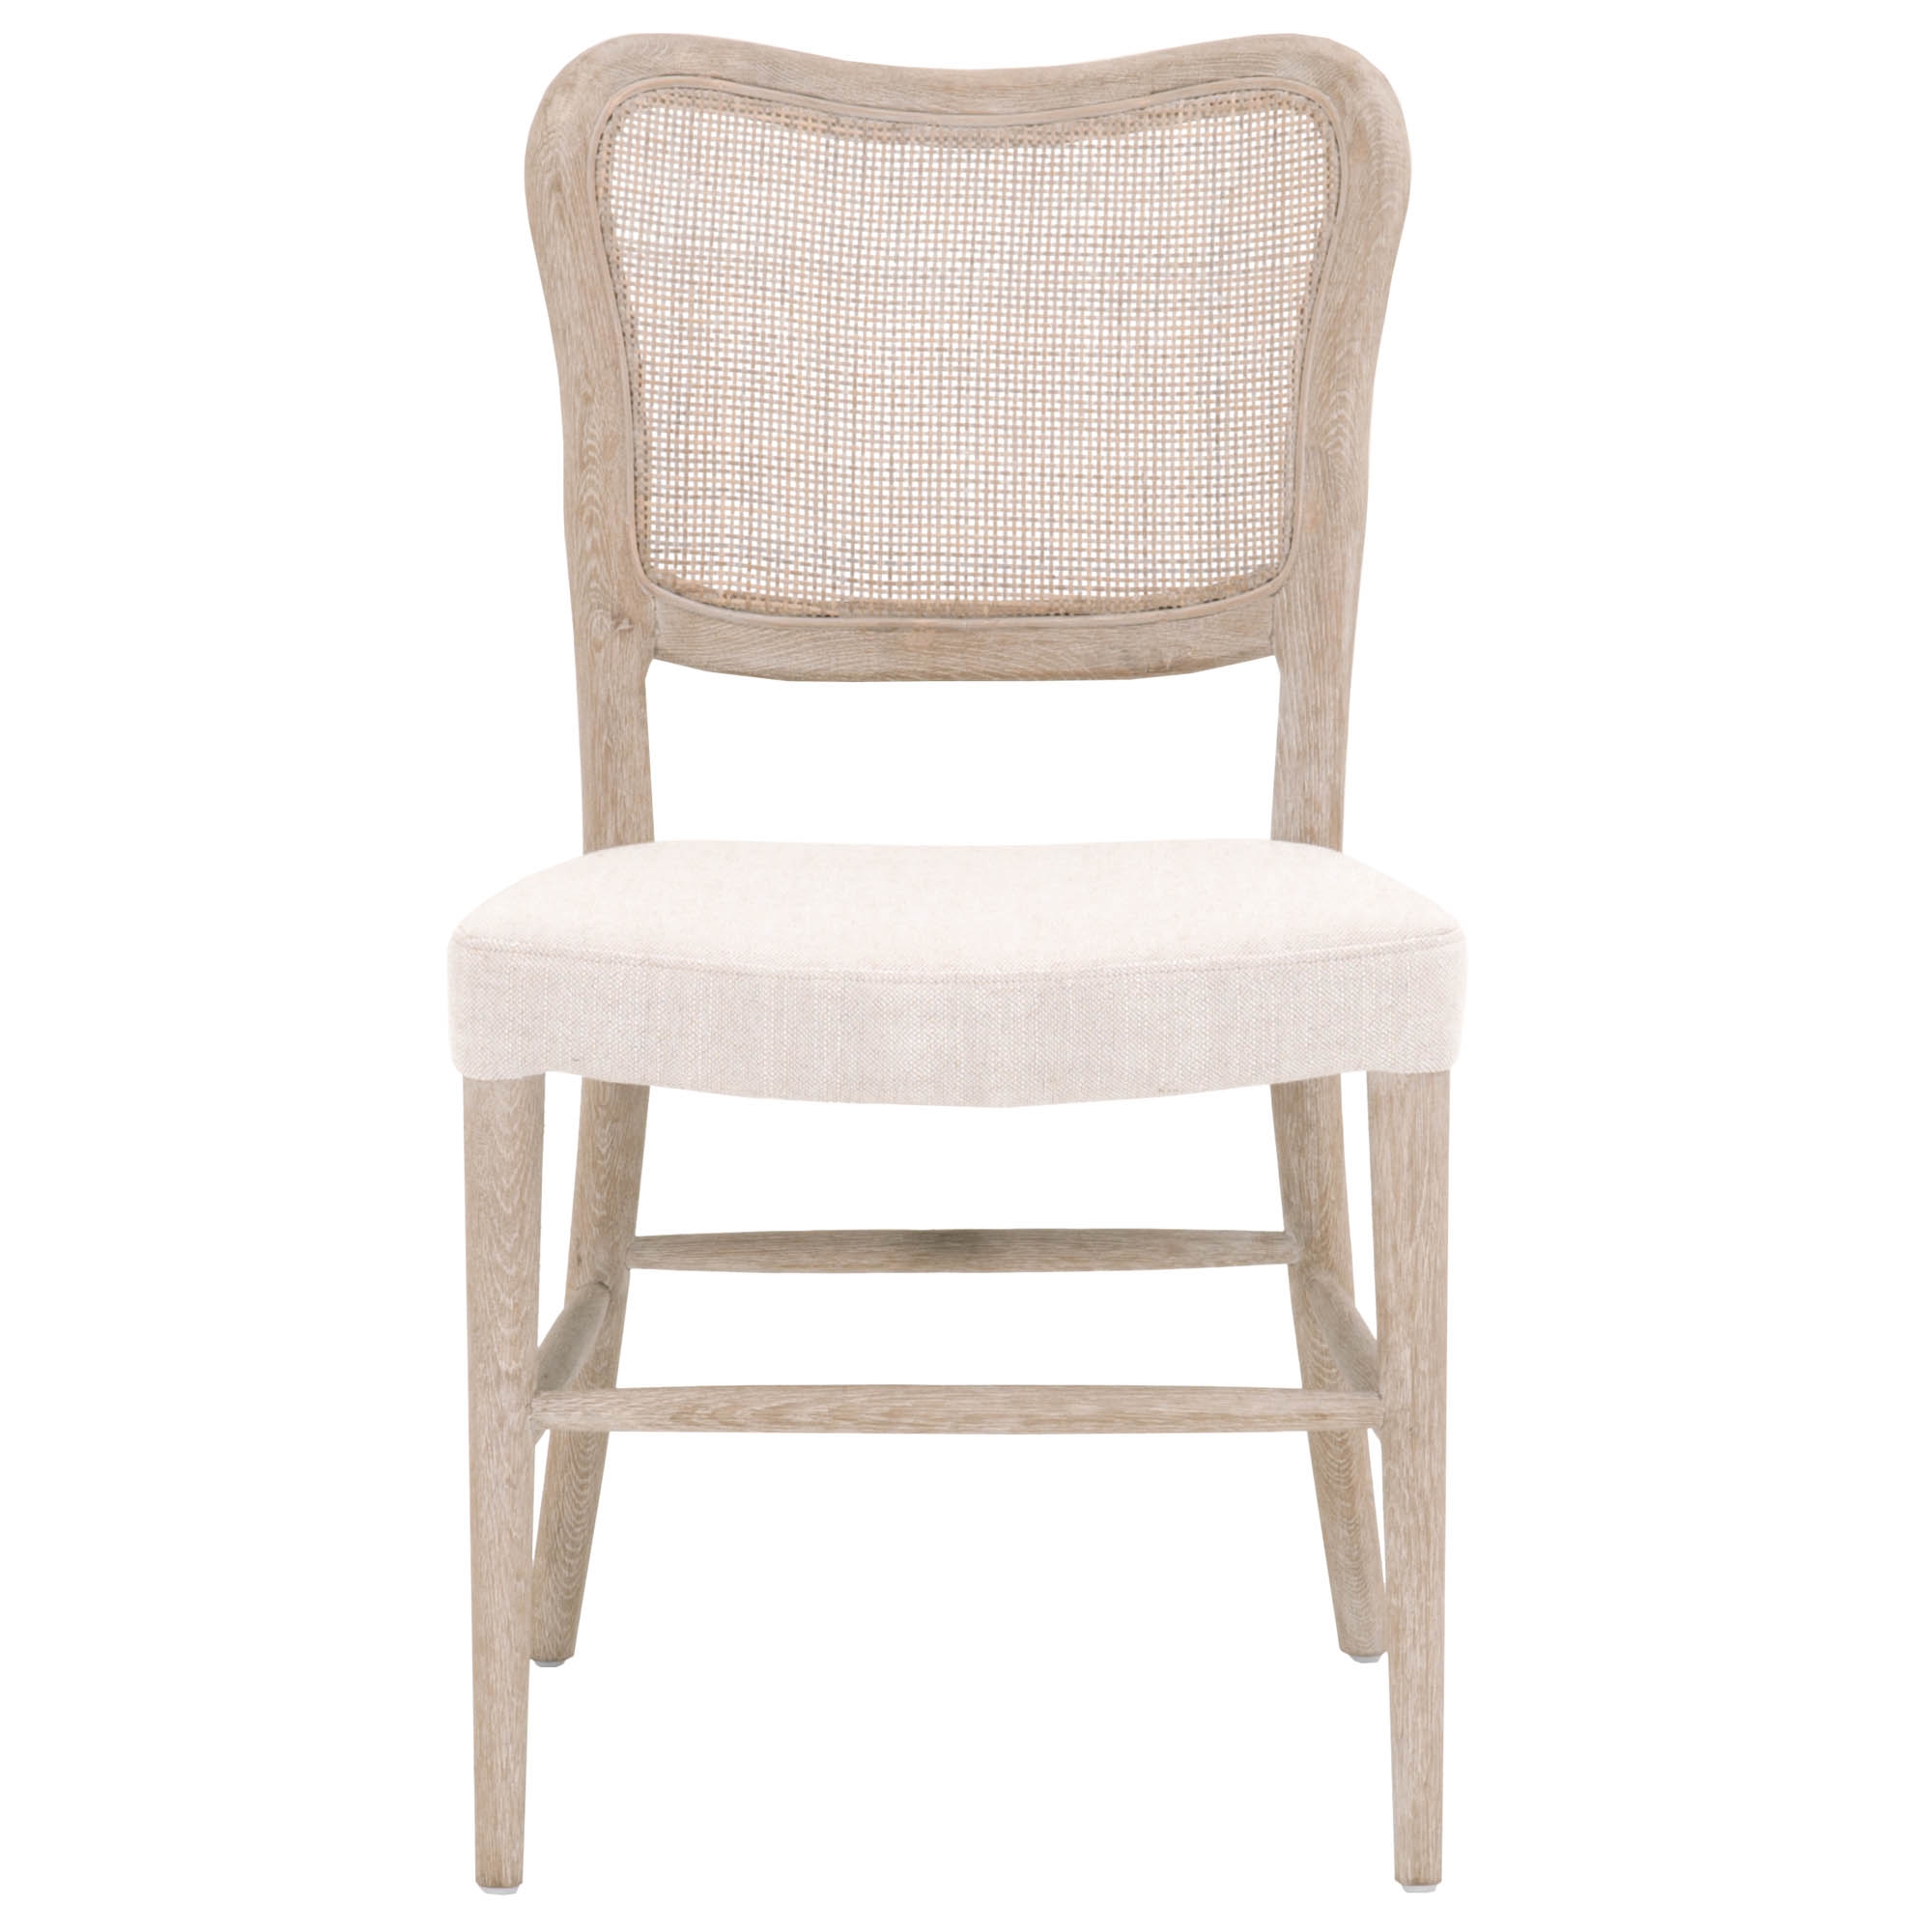 Coraline Dining Chair, Bisque, Set of 2 - Image 0